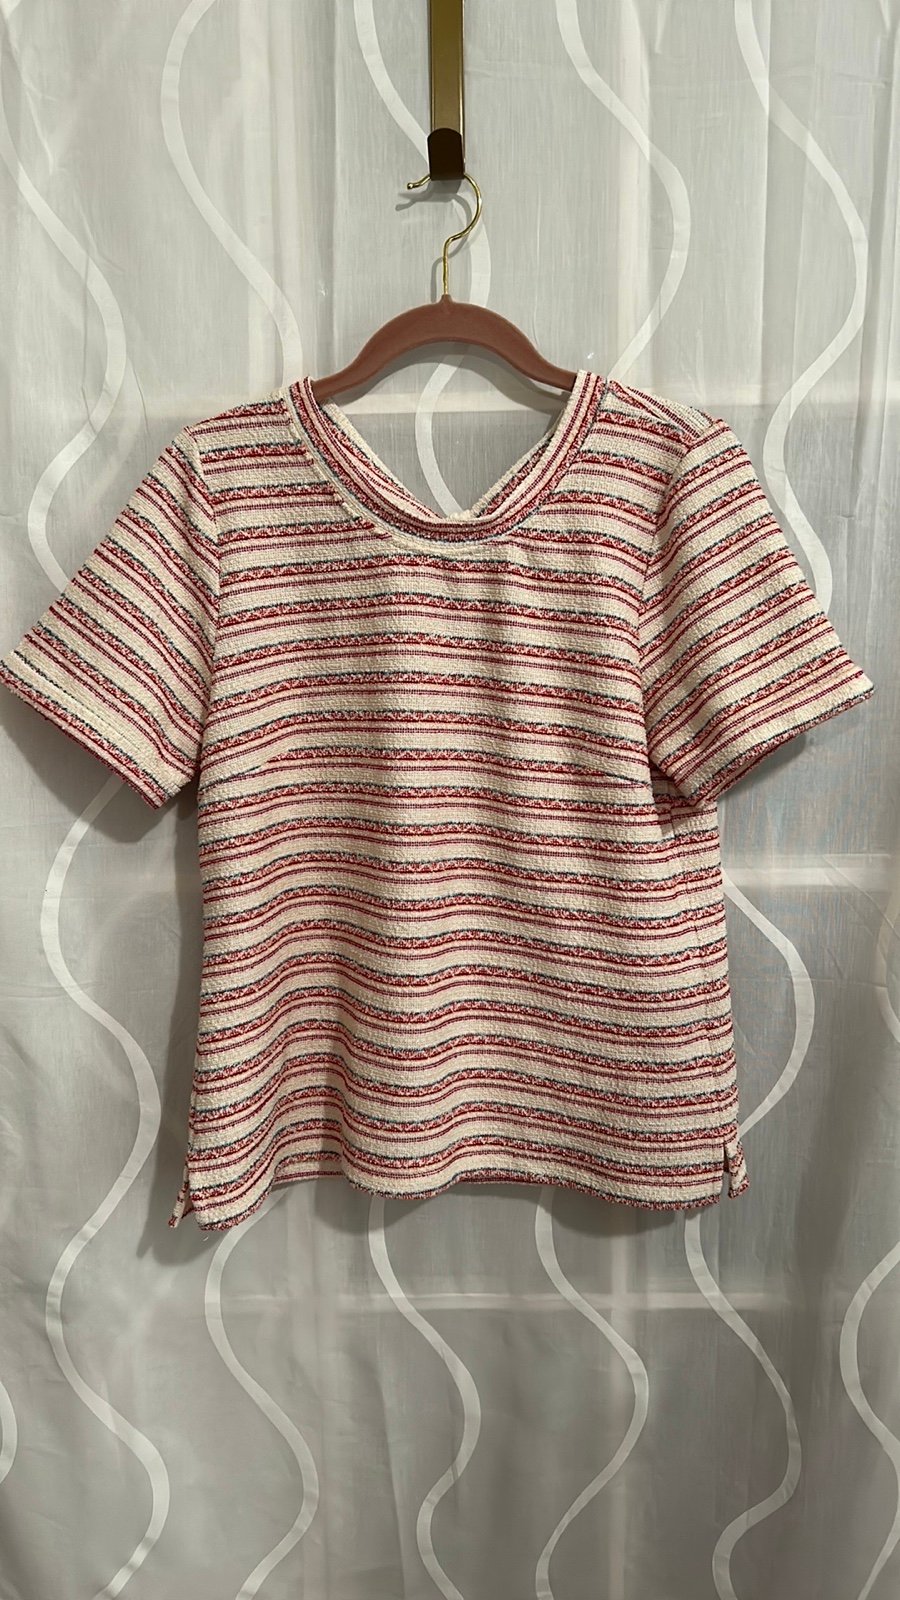 Personality Anthropologie Crew Neck, Striped Top, Size 